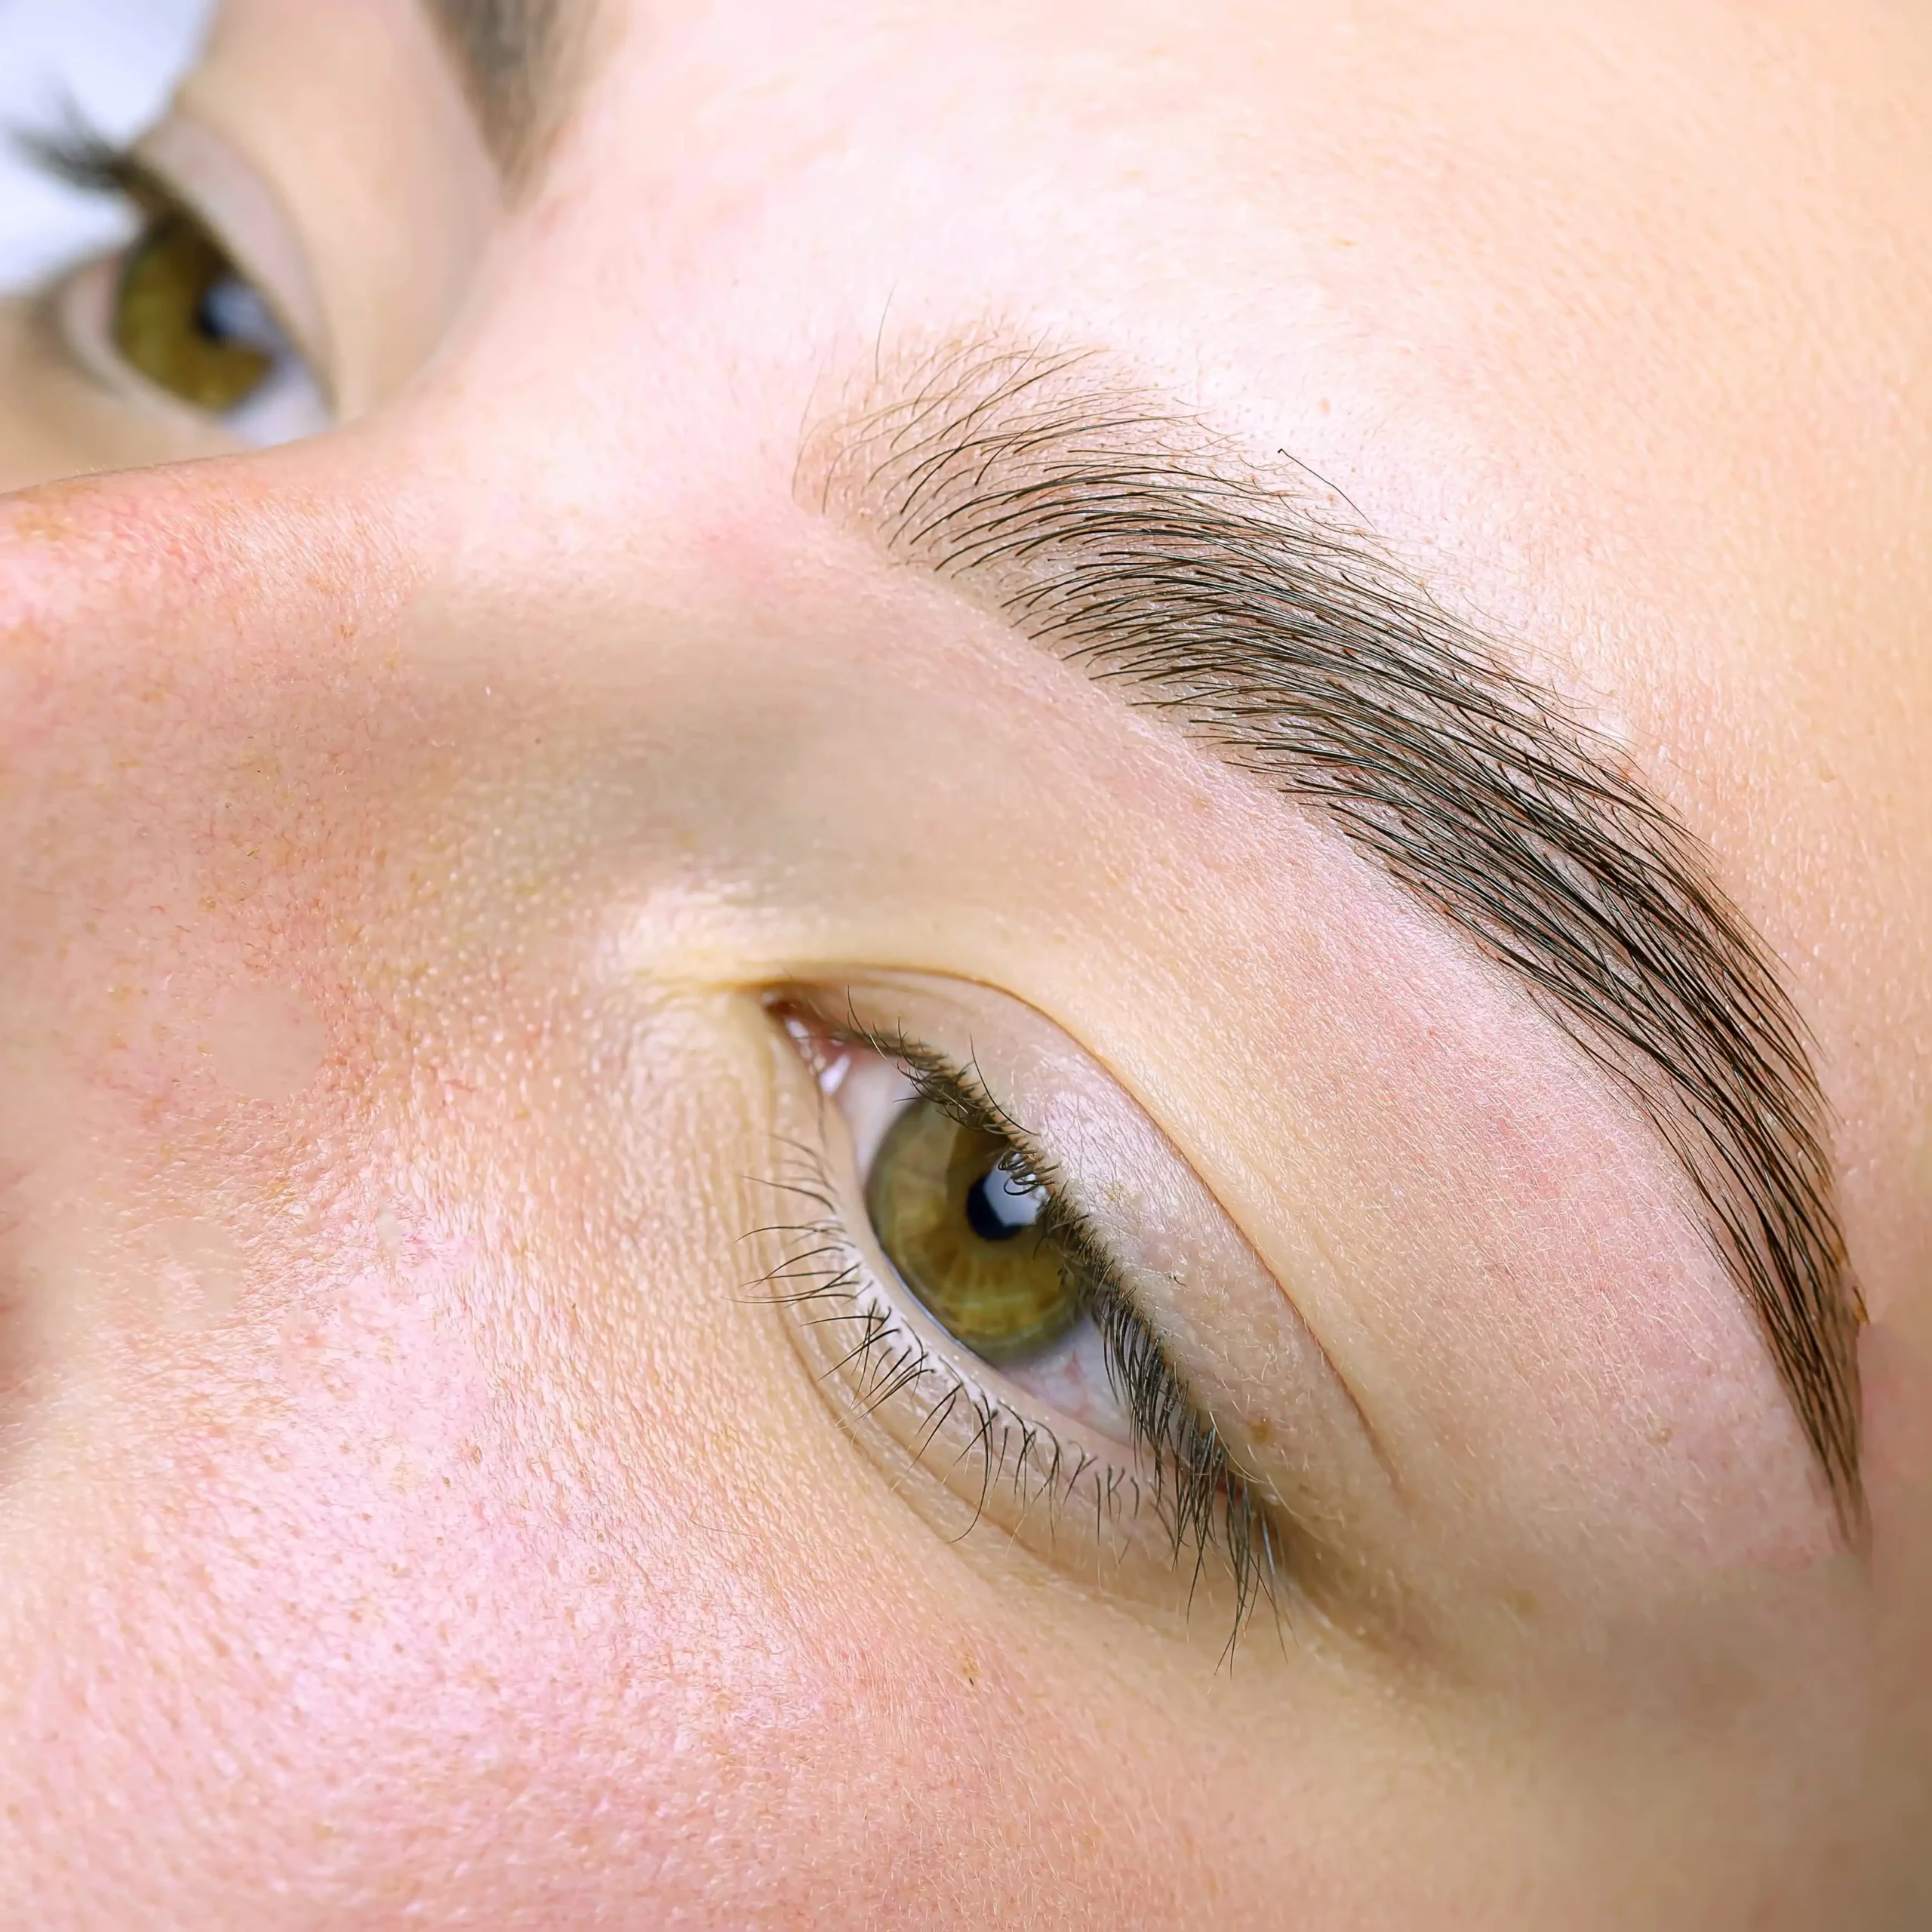 Beauty Unlimited - Dienstleistung - lashes & brows - brows lifting